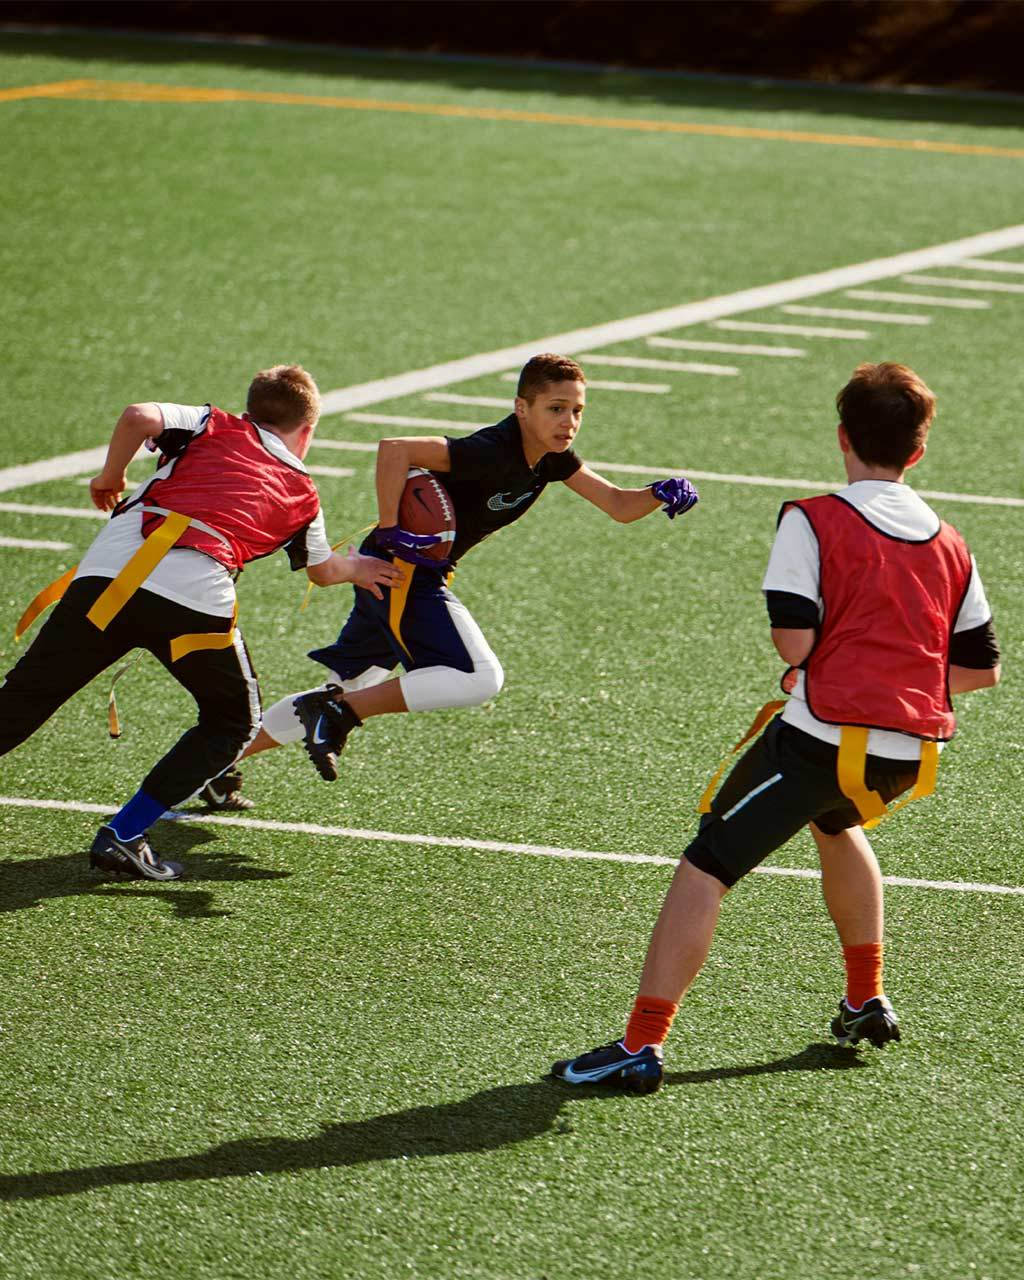 Nikeflag Football Summer Camp Would Be Translated Into Italian As 